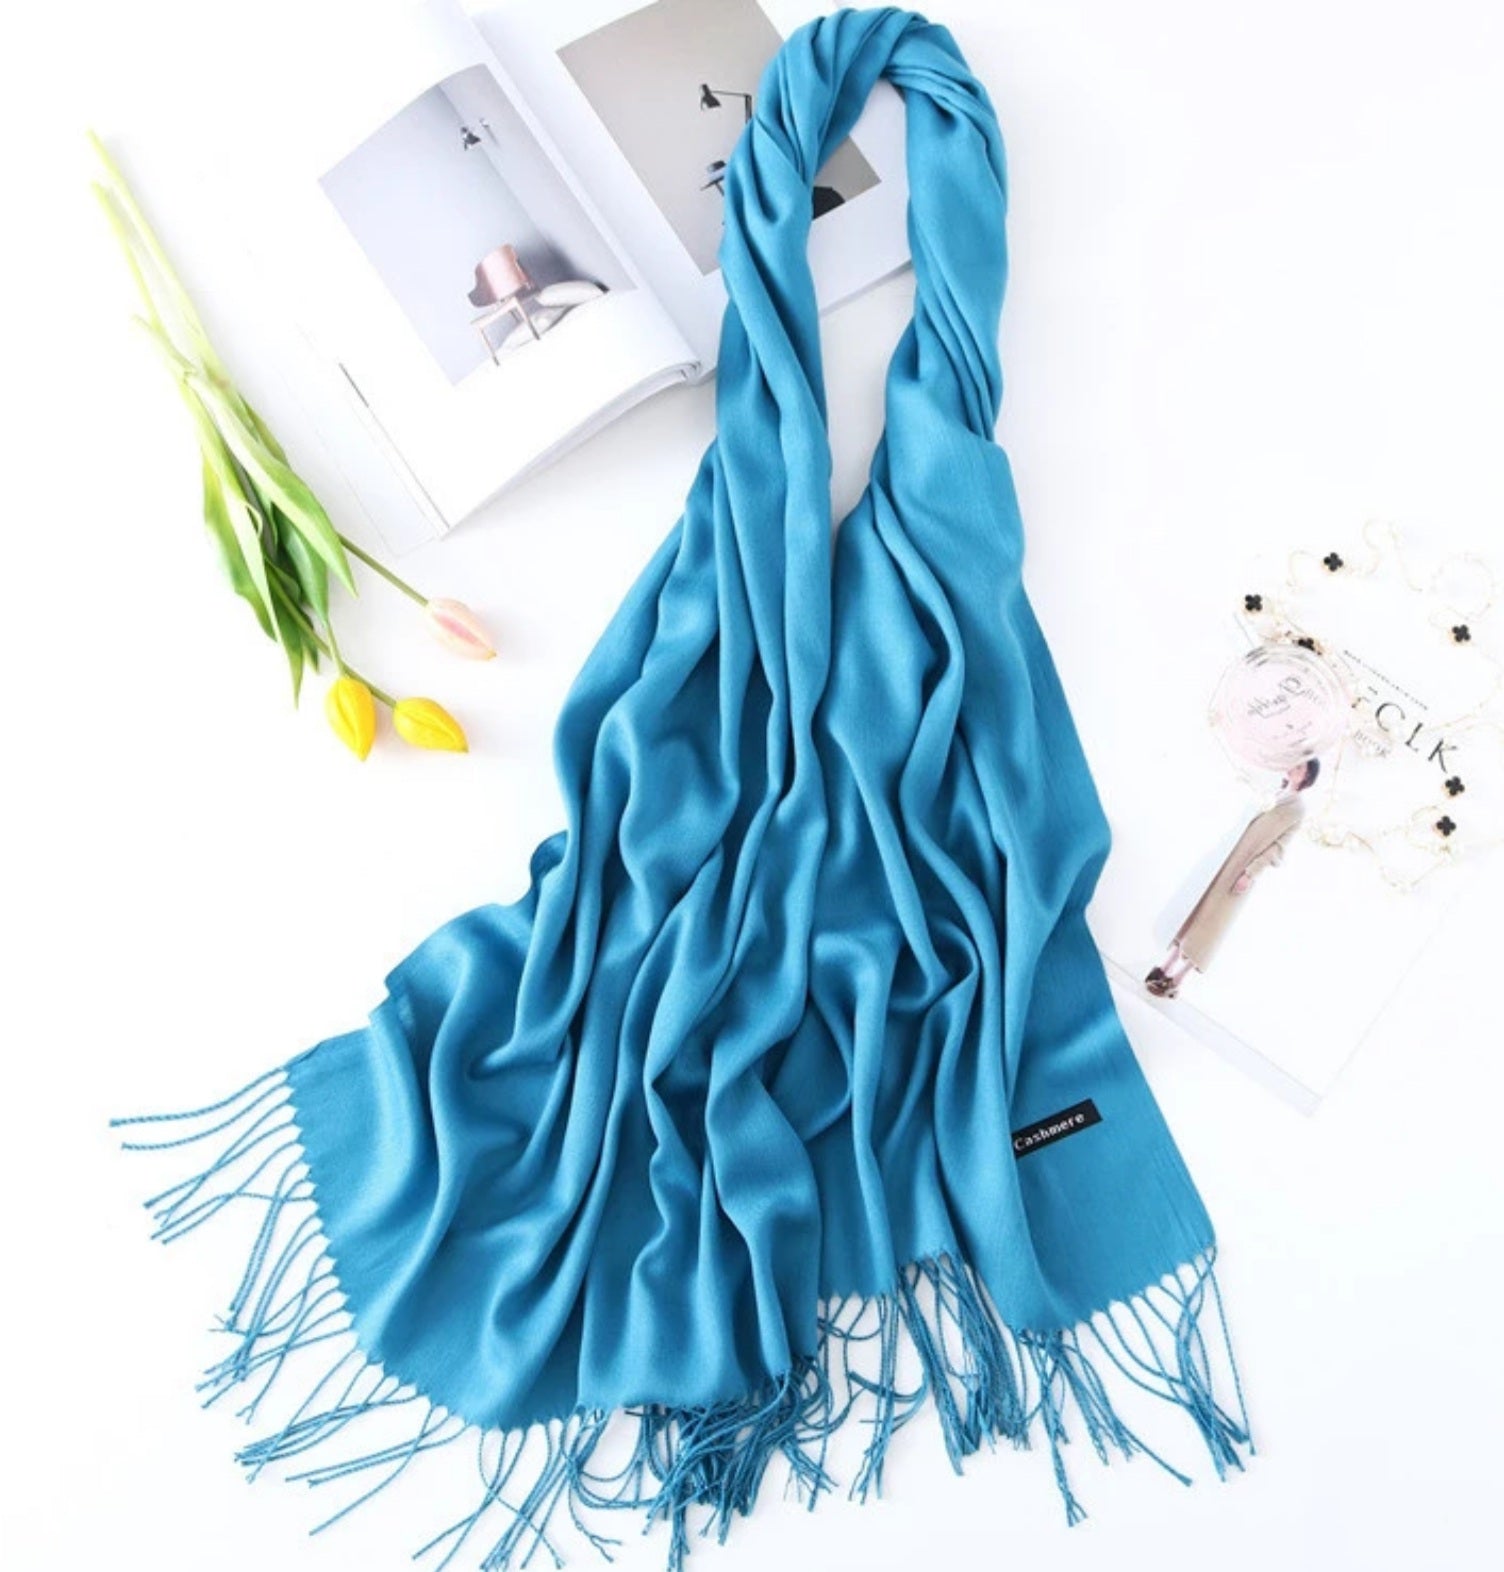 Wholesale Ready to ship luxury ladies name brand scarf fashion neck warm  soft long women designer brand scarves cashmere From m.